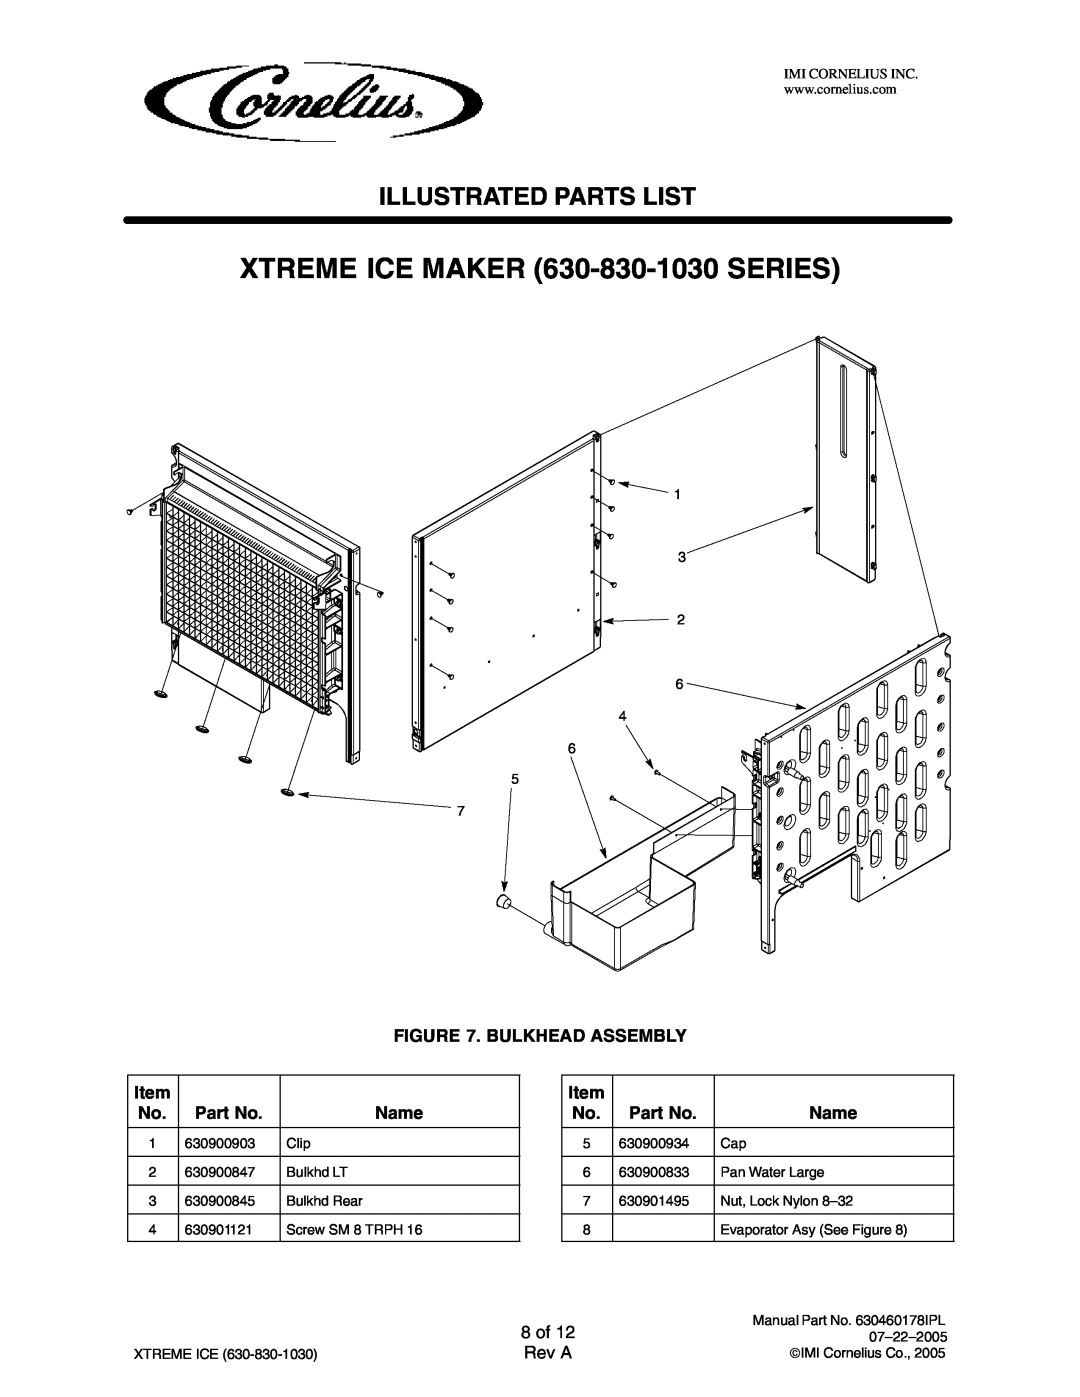 Cornelius 631808002 8 of, XTREME ICE MAKER 630-830-1030SERIES, Illustrated Parts List, Bulkhead Assembly, Item, Part No 